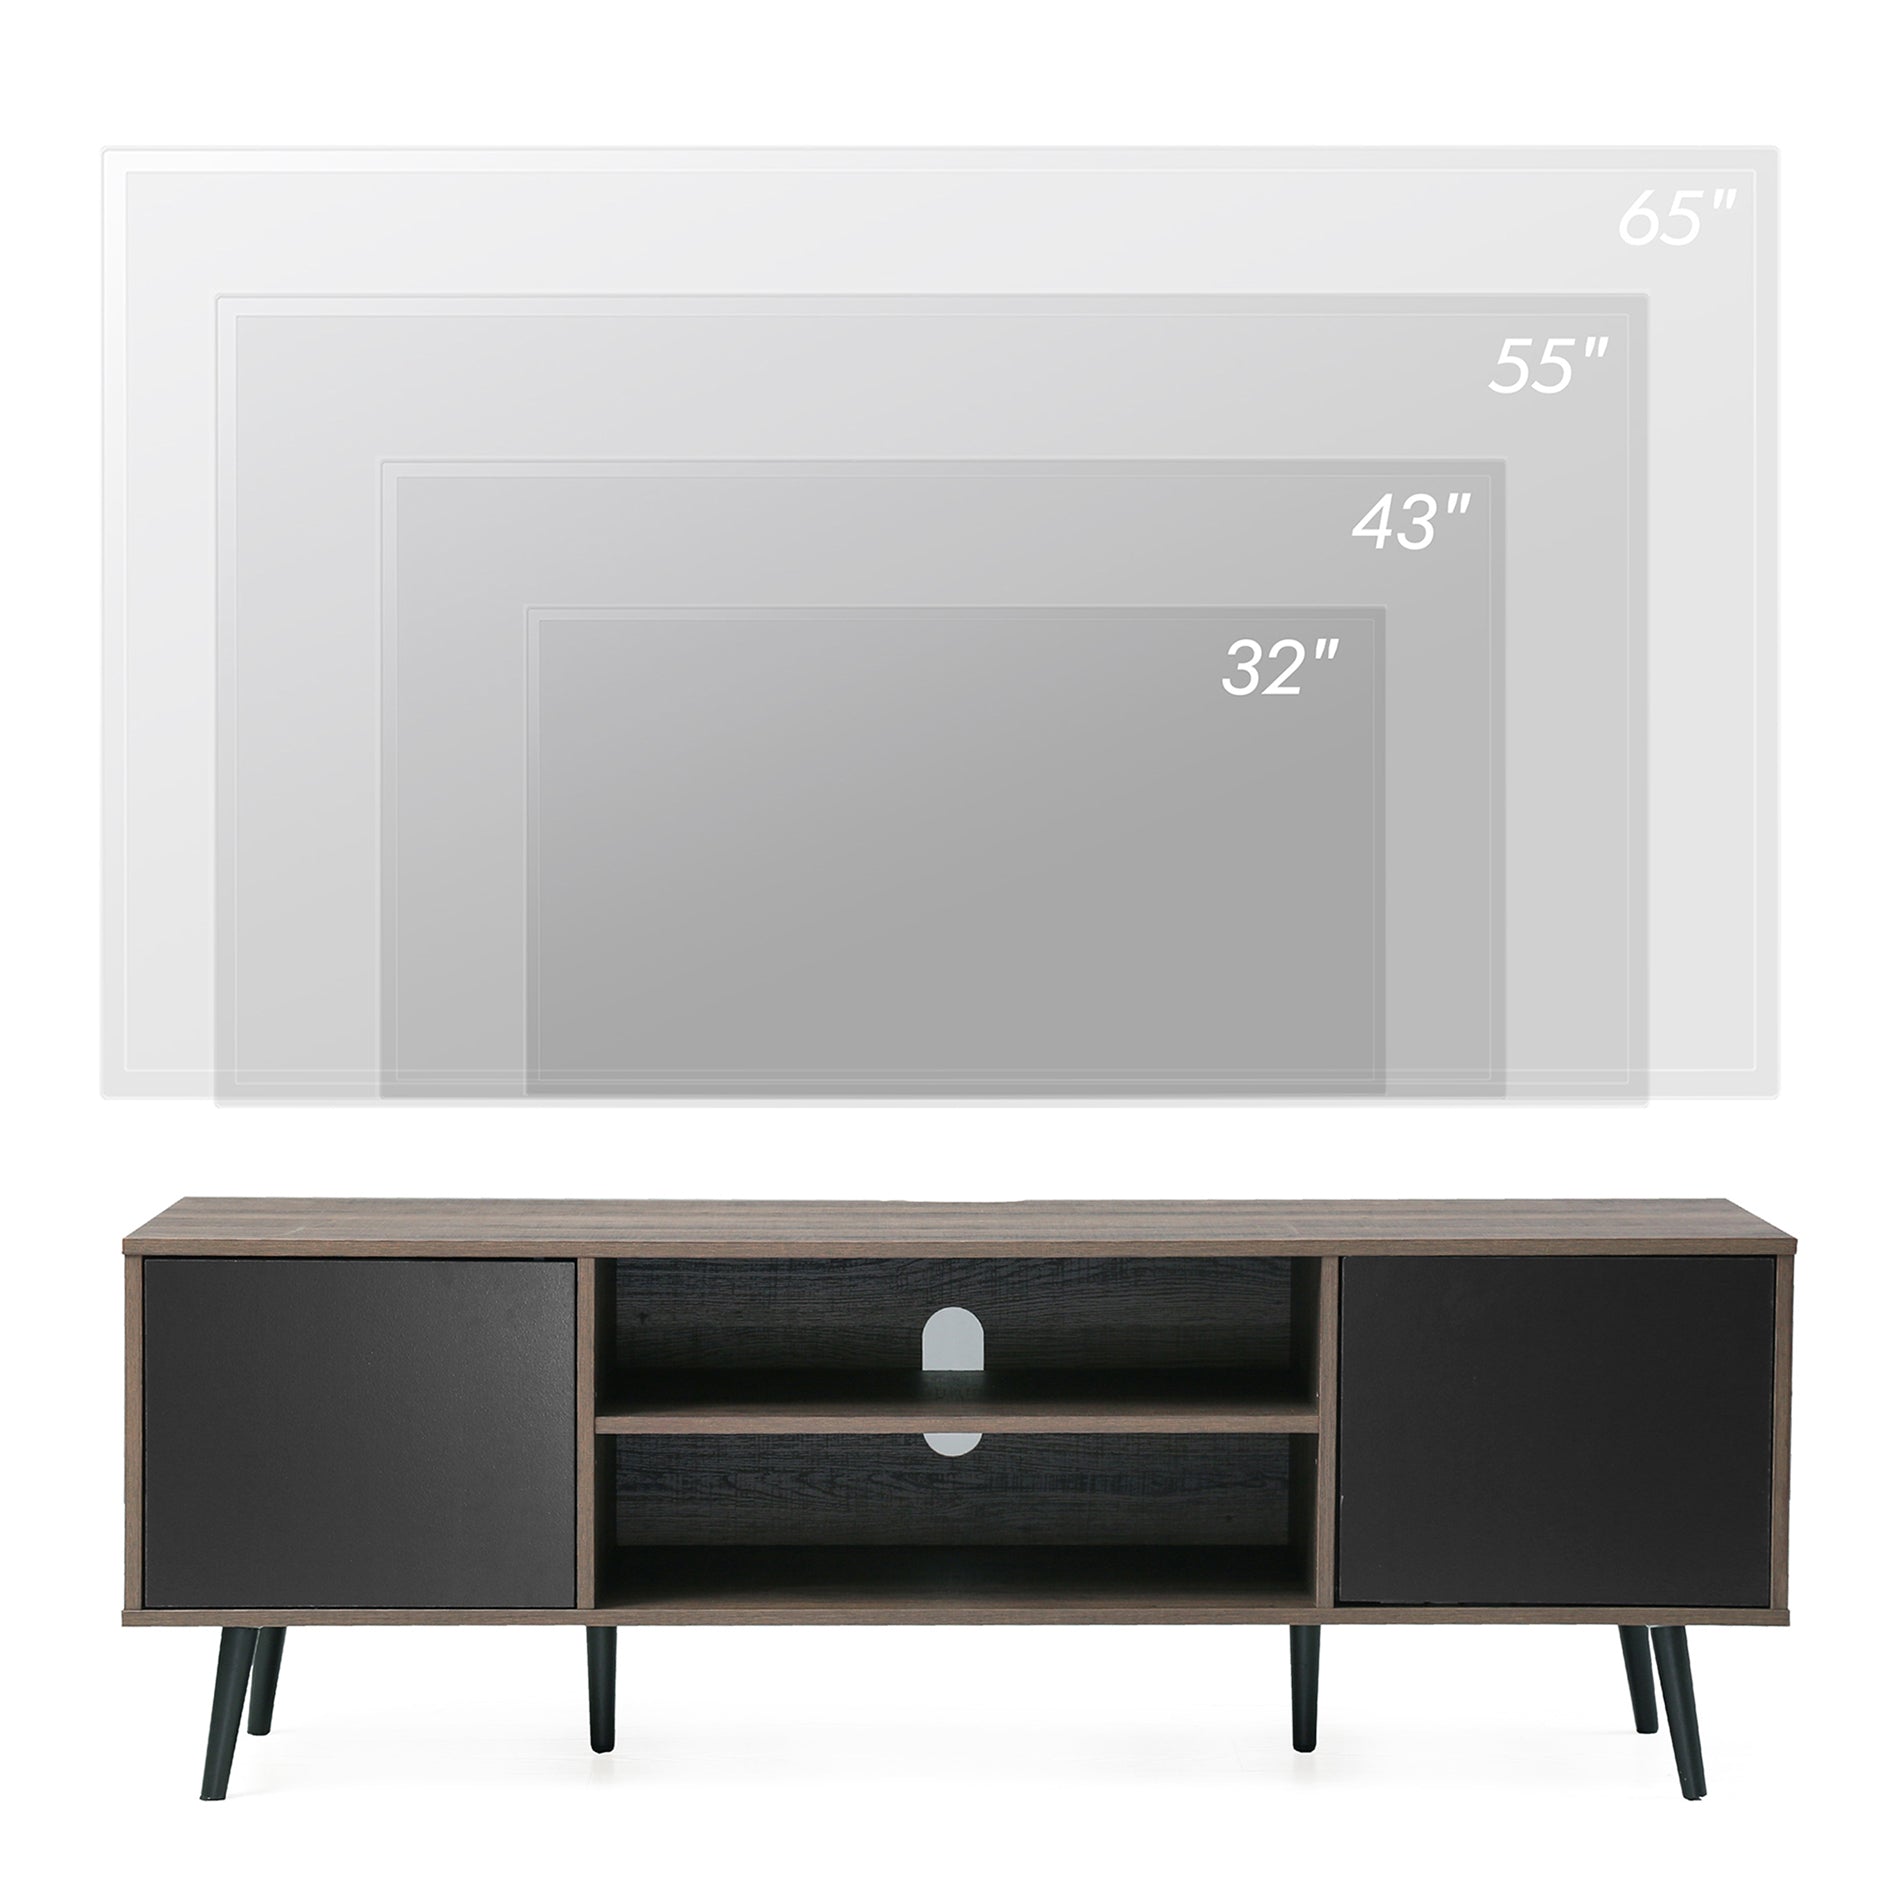 WAMPAT 60" Mid-Century Modern TV Stand for 32-65 Inch TV, Wood TV Console Media Cabinet, Black